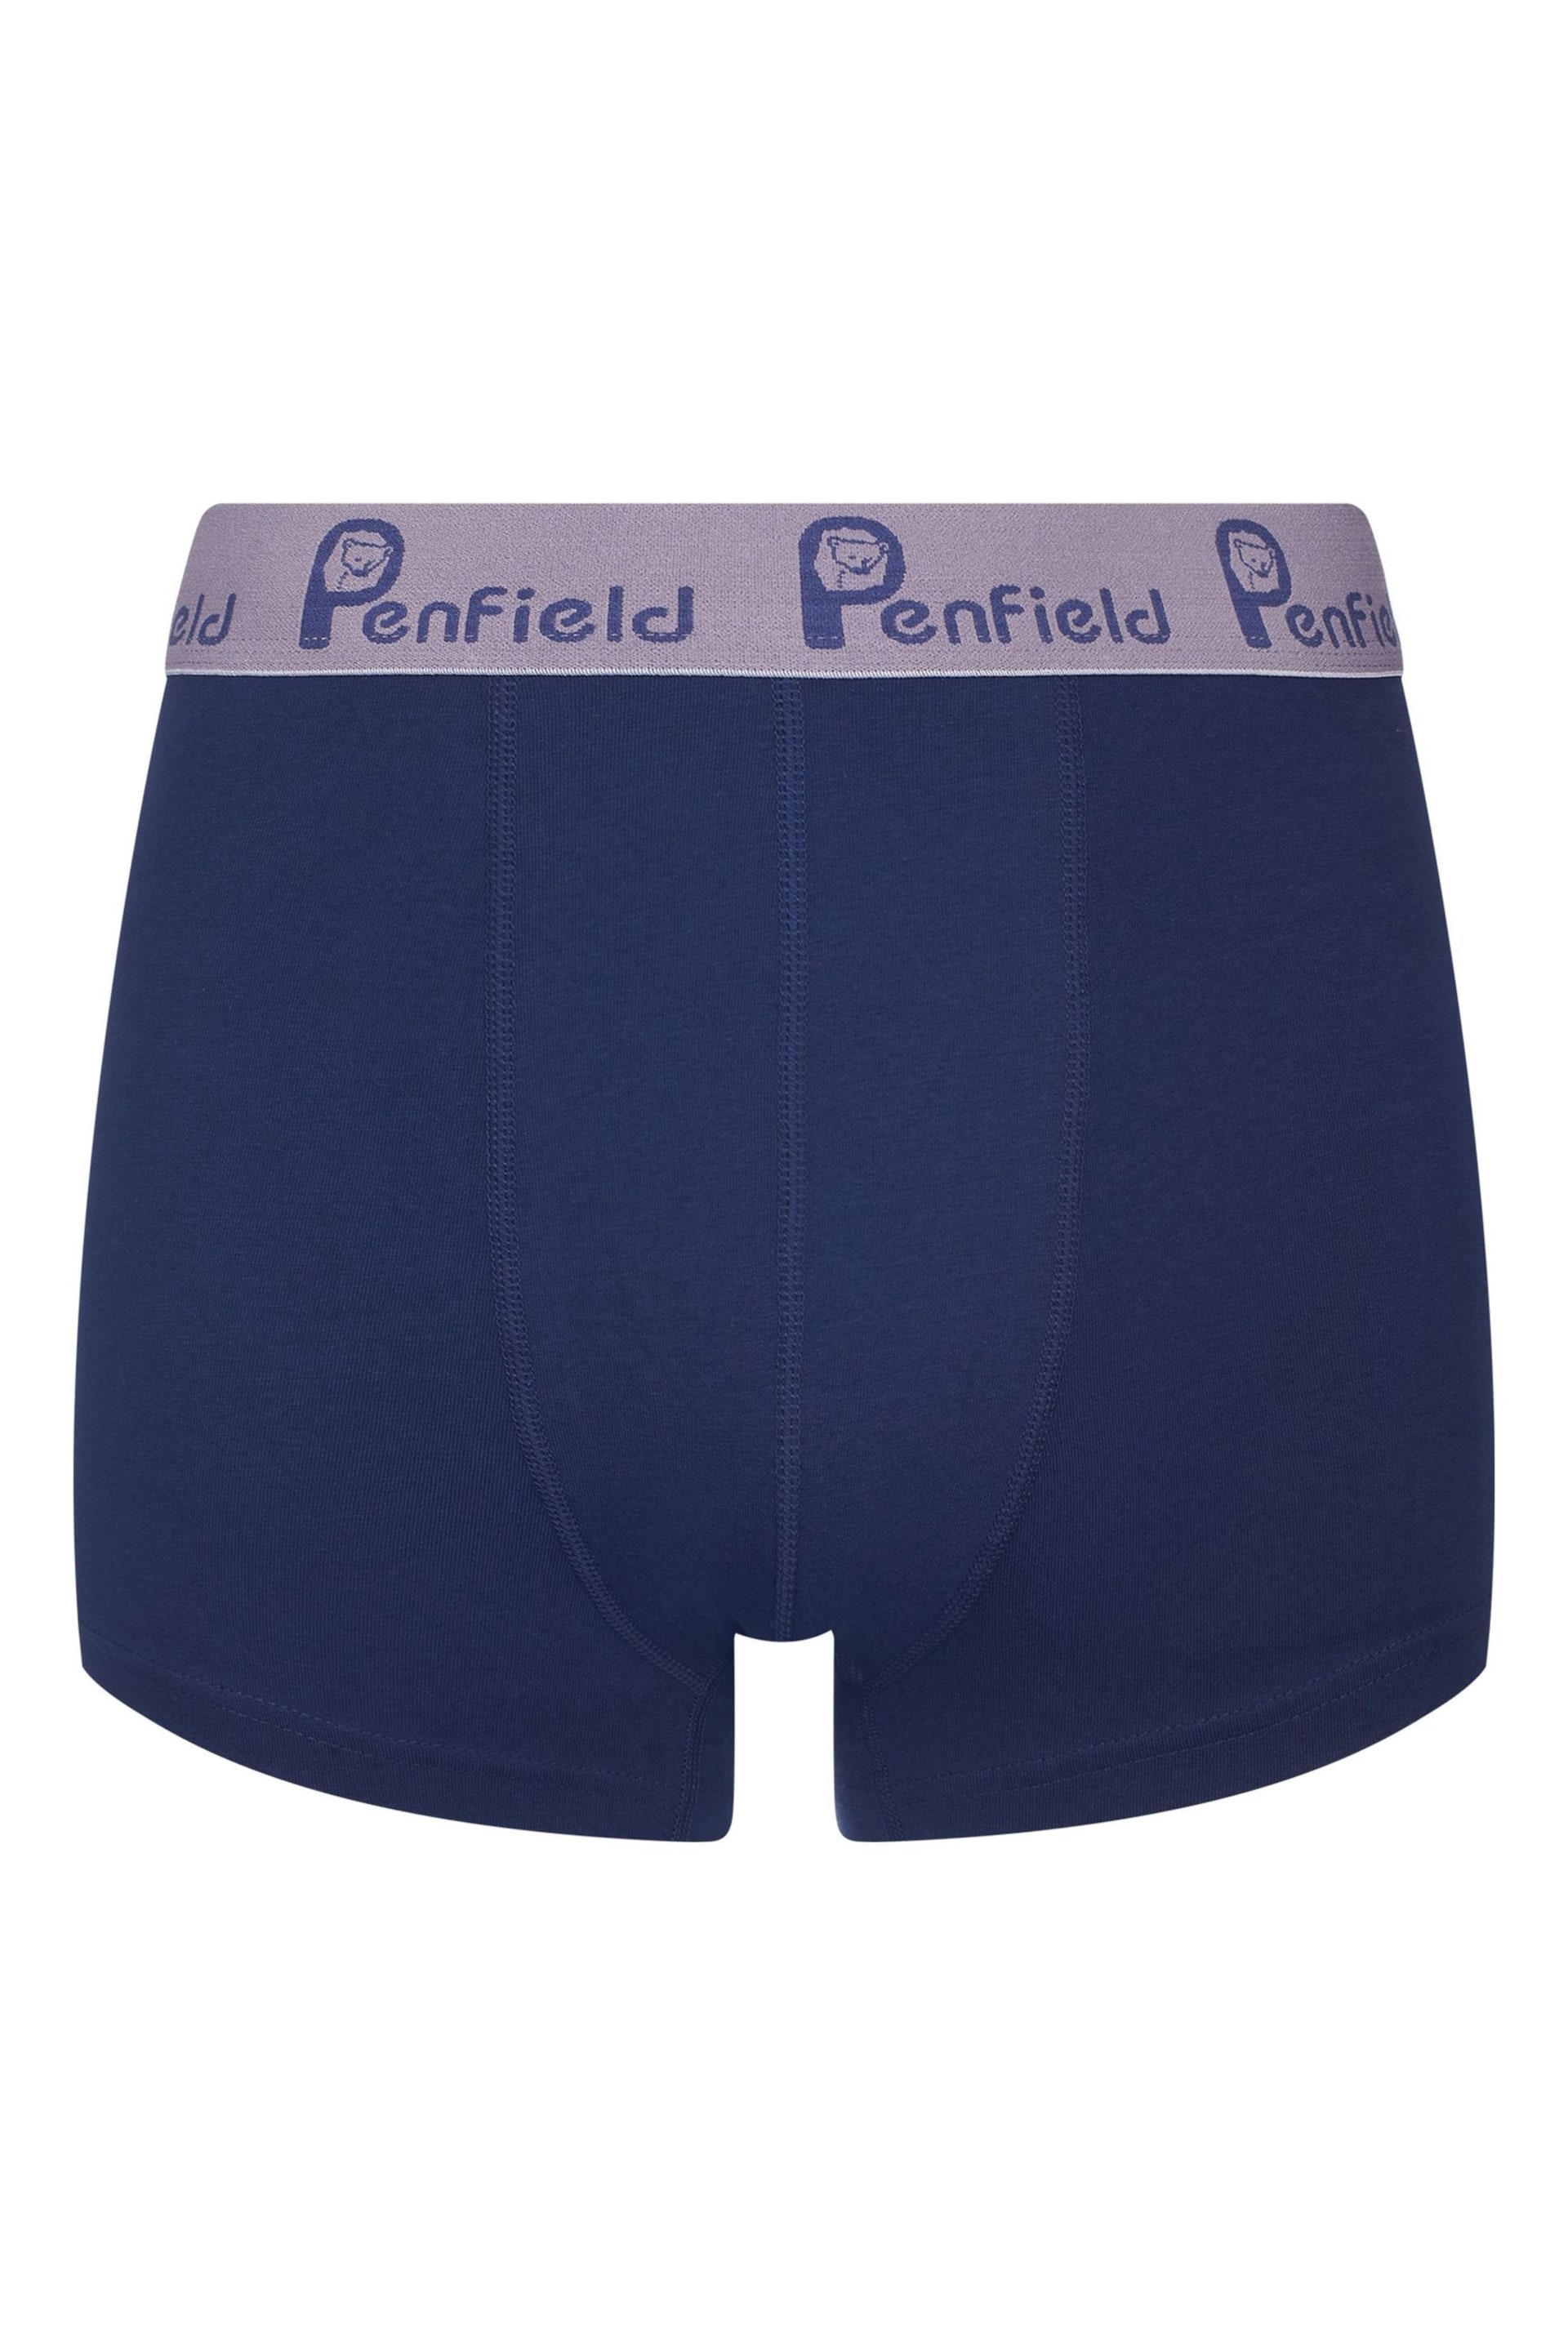 Penfield Blue Penfield Script Boxers 3 Pack - Image 2 of 5